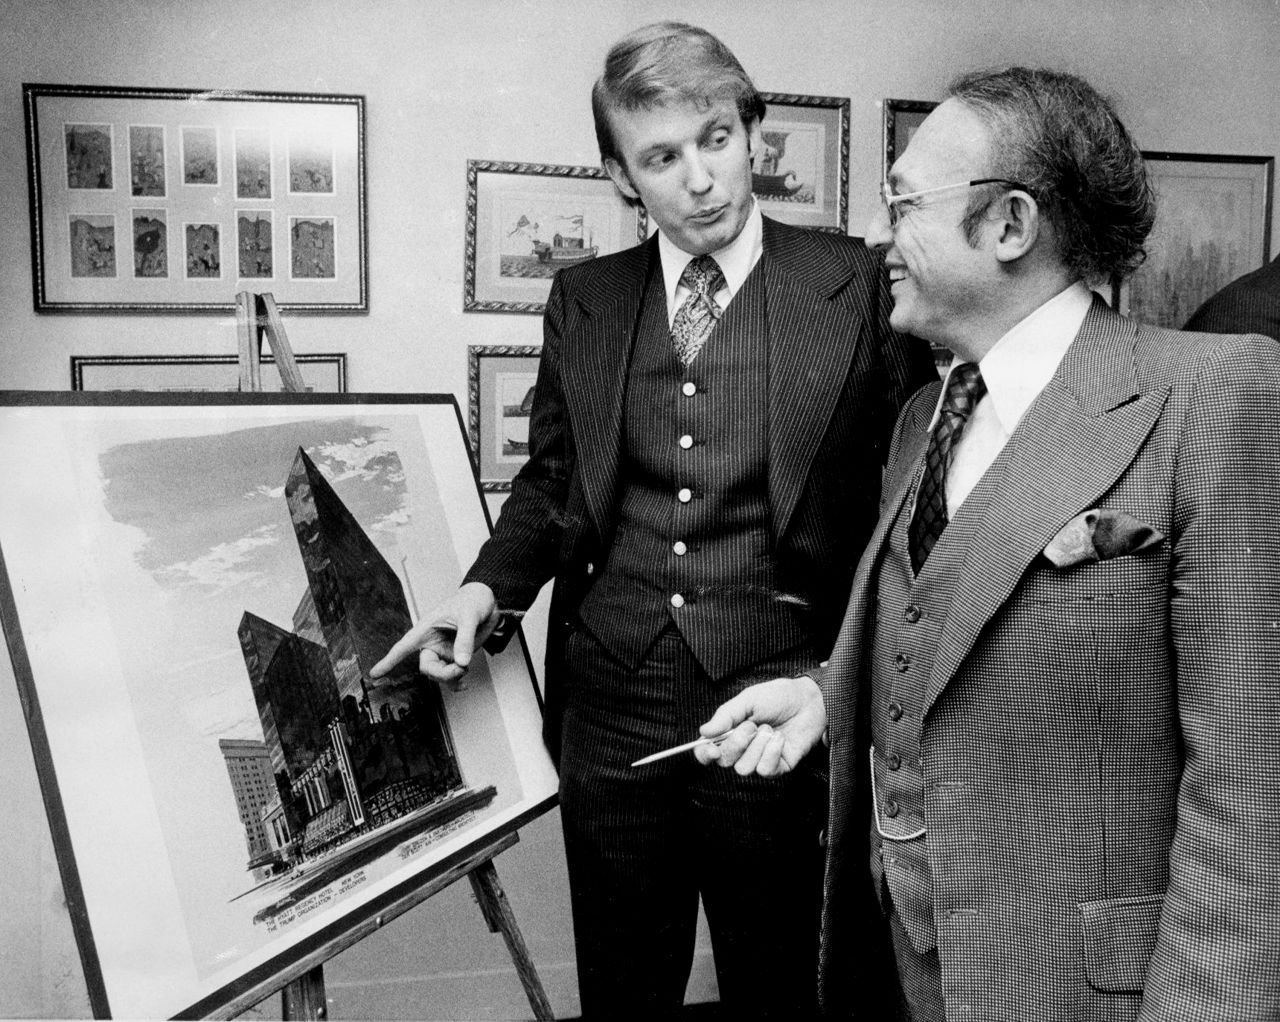 Trump stands with Alfred Eisenpreis, New York's economic development administrator, in 1976 while they look at a sketch of a new 1,400-room renovation project of the Commodore Hotel. After graduating from college in 1968, Trump worked with his father on developments in Queens and Brooklyn before purchasing or building multiple properties in New York and Atlantic City, New Jersey. Those properties included Trump Tower in New York and Trump Plaza and multiple casinos in Atlantic City.